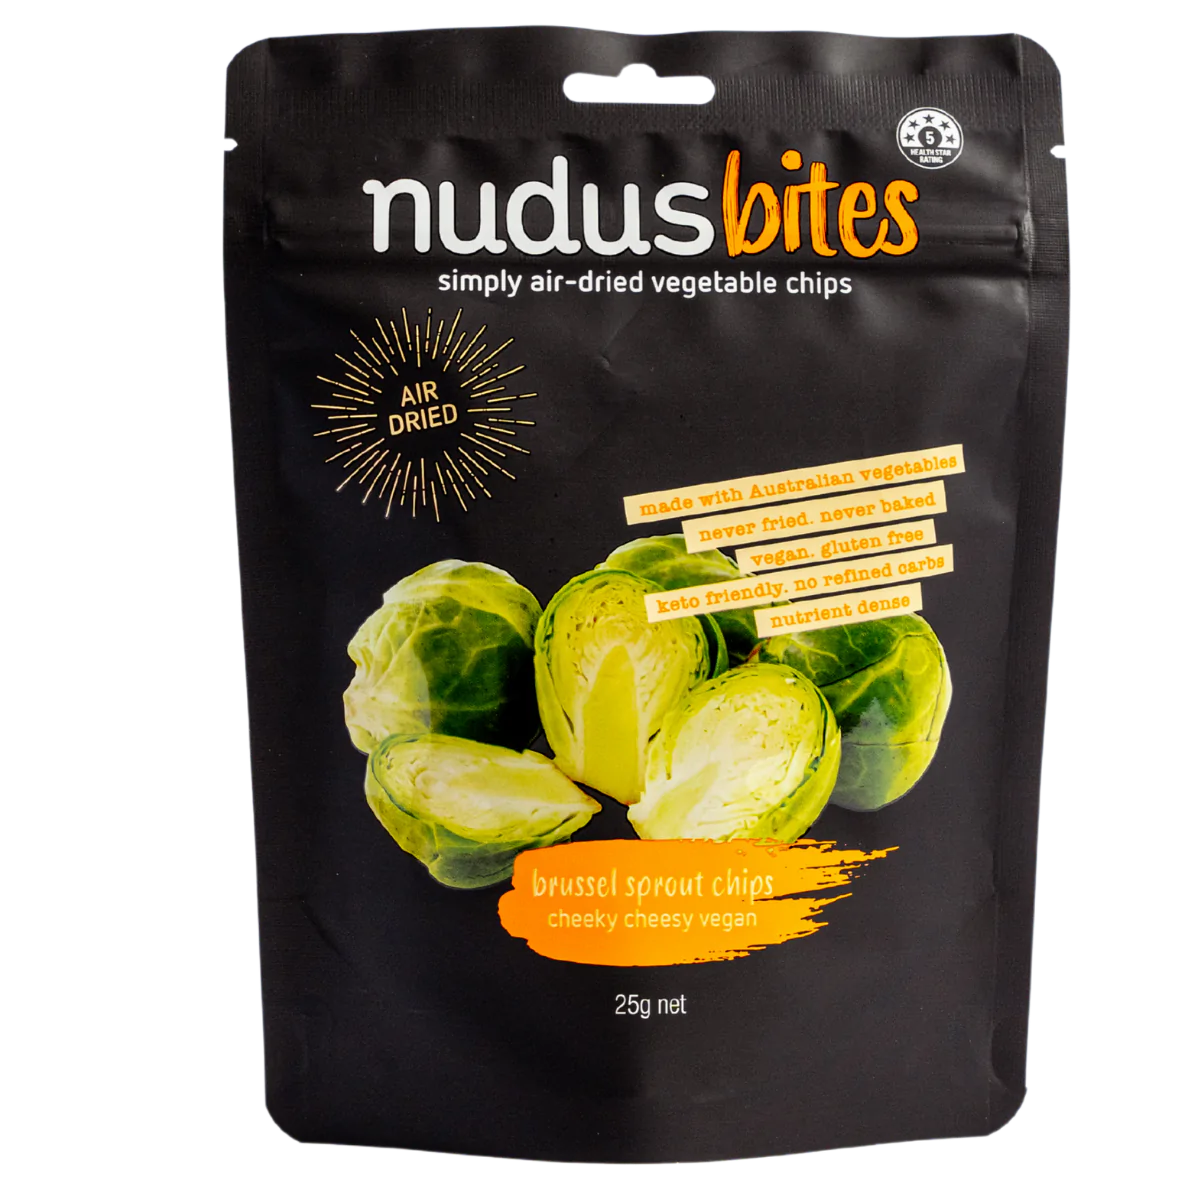 Nudus Bites Vegetable Air Dried Brussel Sprout Chips 20g, Cheeky Cheesy Vegan Flavour